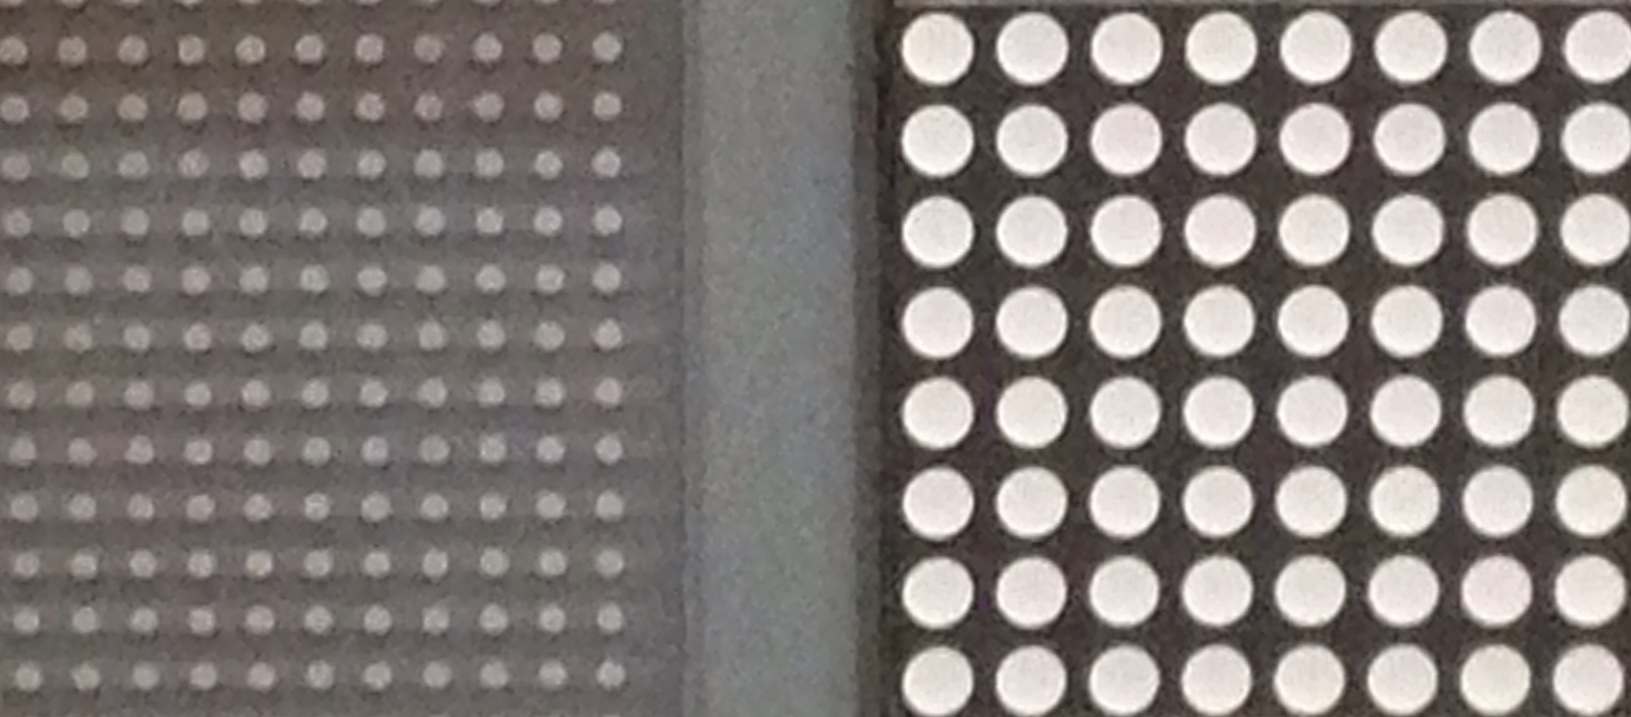 This is a close up view for comparison of the original Plasma display dots against the GiantDOTS LED display.